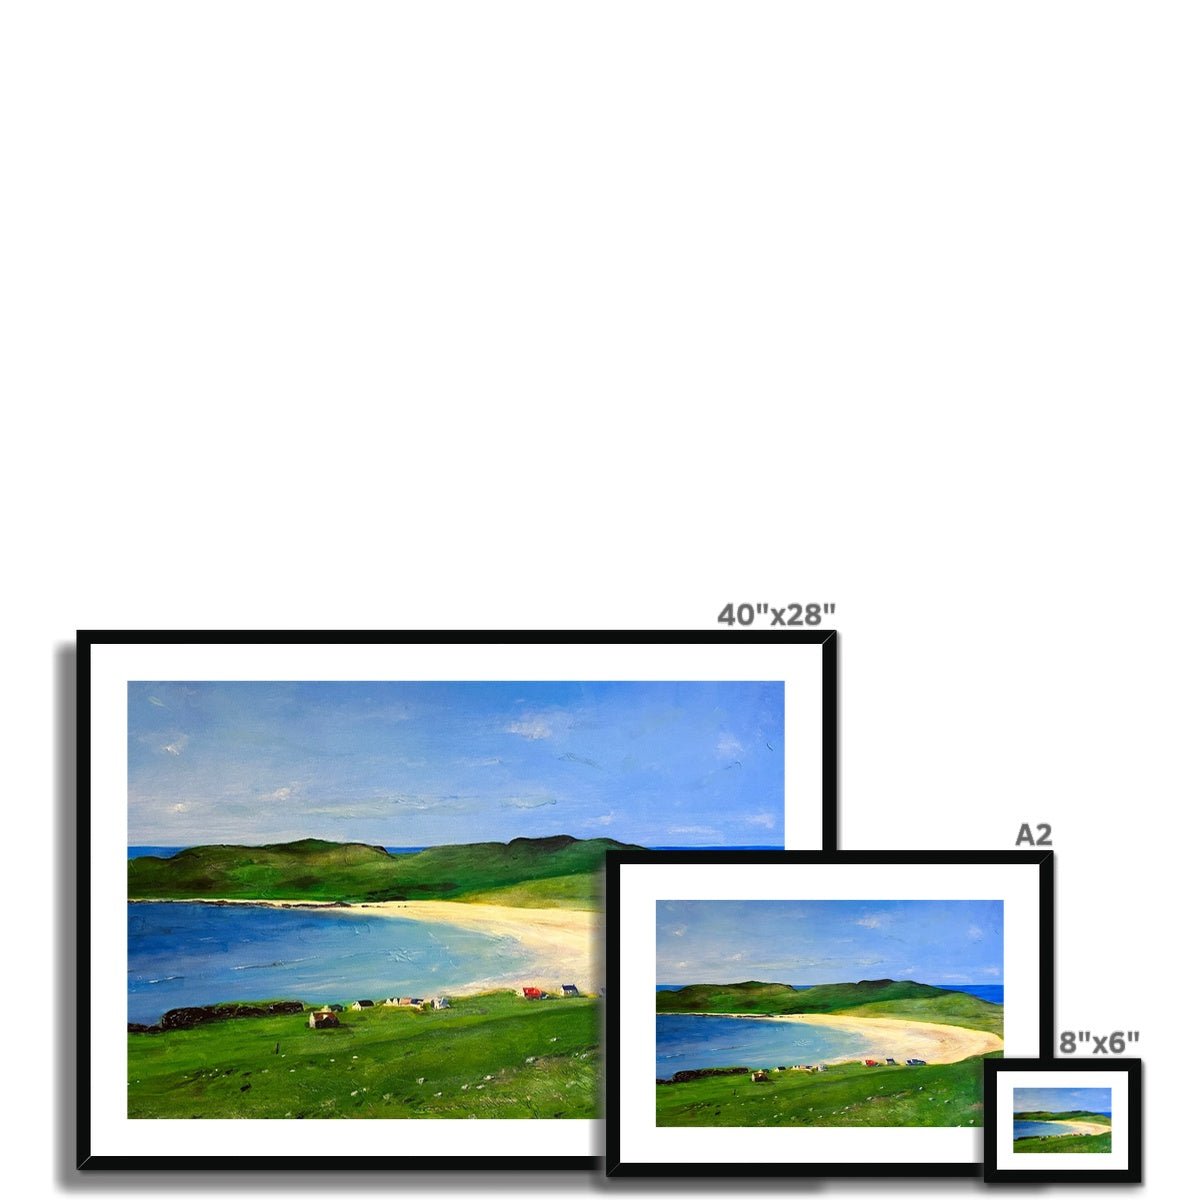 Balephuil Beach Tiree Painting | Framed & Mounted Prints From Scotland-Framed & Mounted Prints-Hebridean Islands Art Gallery-Paintings, Prints, Homeware, Art Gifts From Scotland By Scottish Artist Kevin Hunter